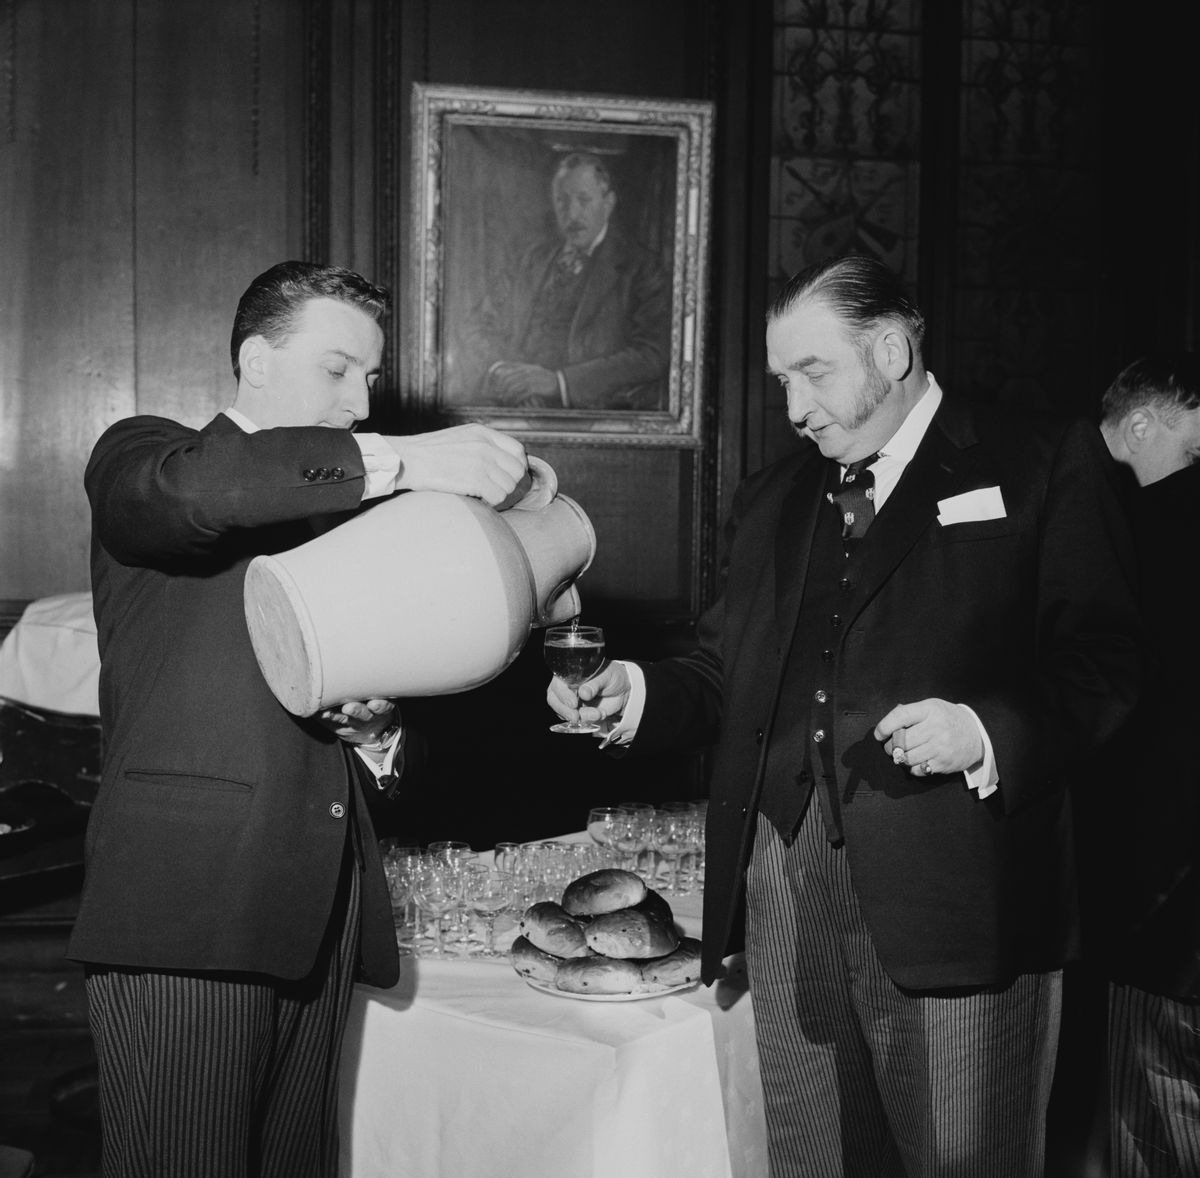 Liveryman Arthur Peters of the Stationers' Company receives ale from a jug held by beadle and butler, Douglas Rowland, at the Stationers' Hall in the City of London, during the annual Cakes And Ale Ceremony, 27th February 1963. The ceremony dates back to 1612, when Alderman John Norton left a bequest to provide Liverymen with a 'feast of cakes and ale' every Ash Wednesday. (Photo by Keystone/Hulton Archive/Getty Images) (Keystone/Hulton Archive/Getty Images)